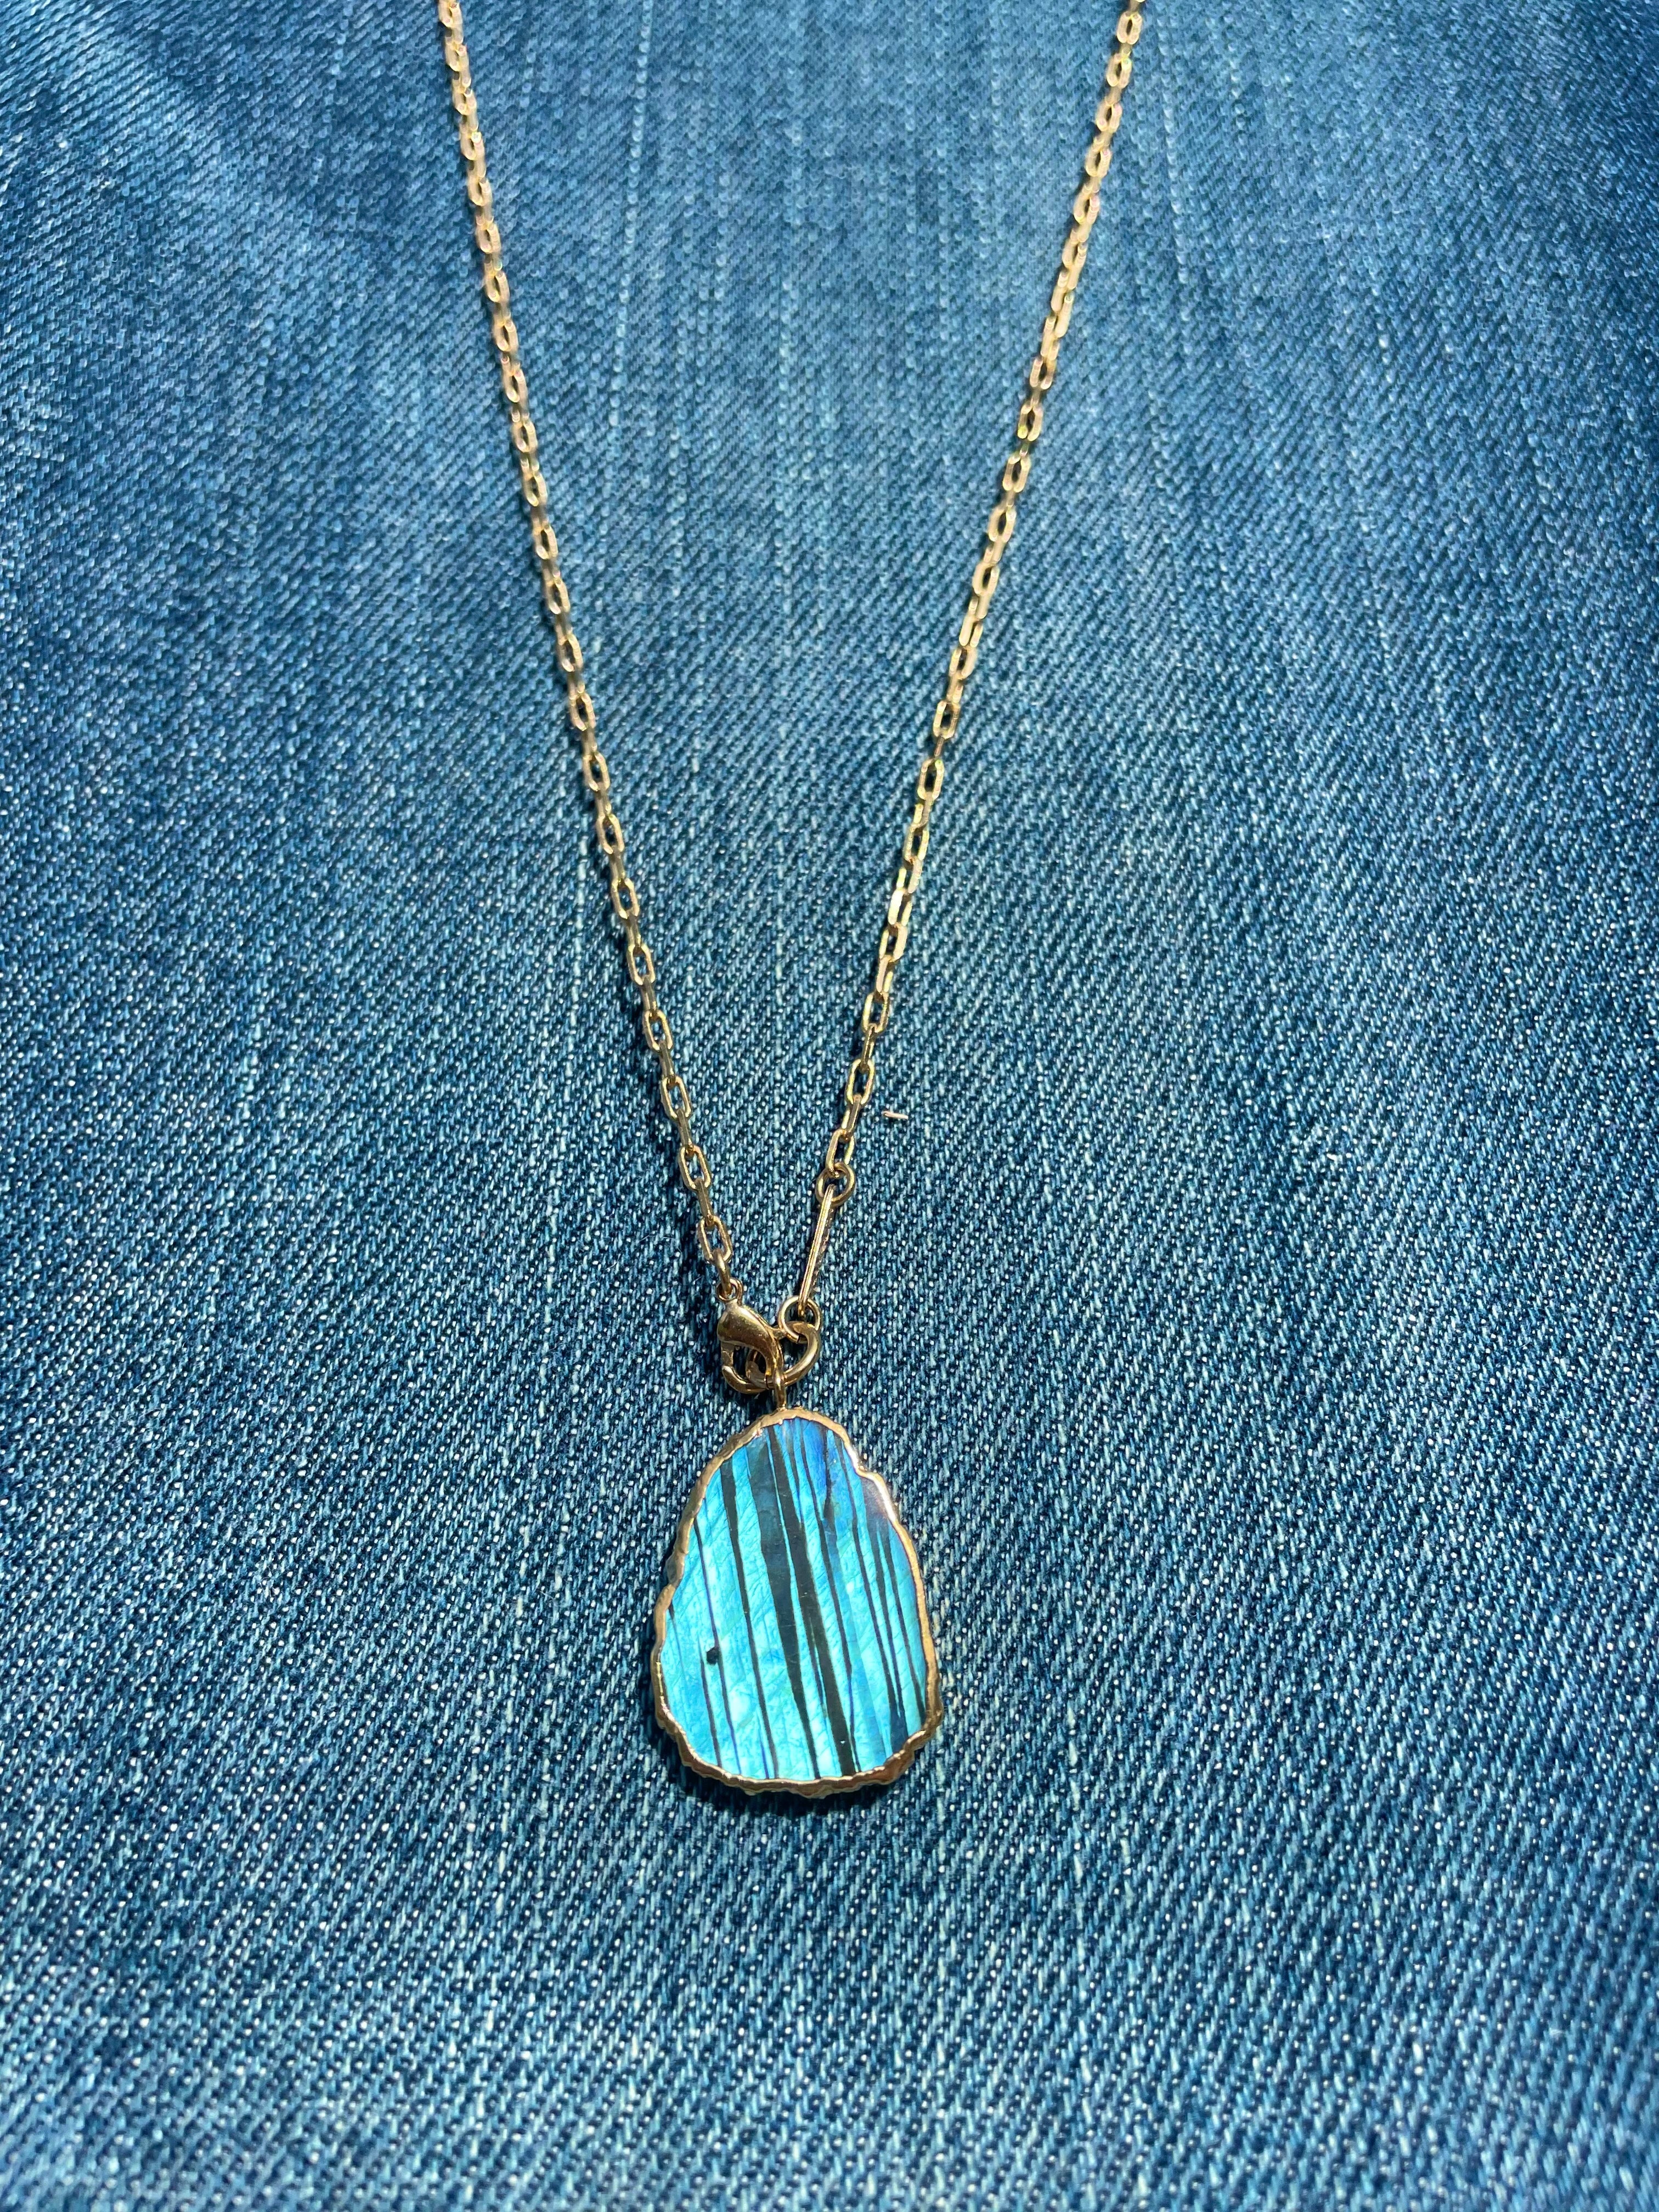 long gold plated necklace with labradorite stone